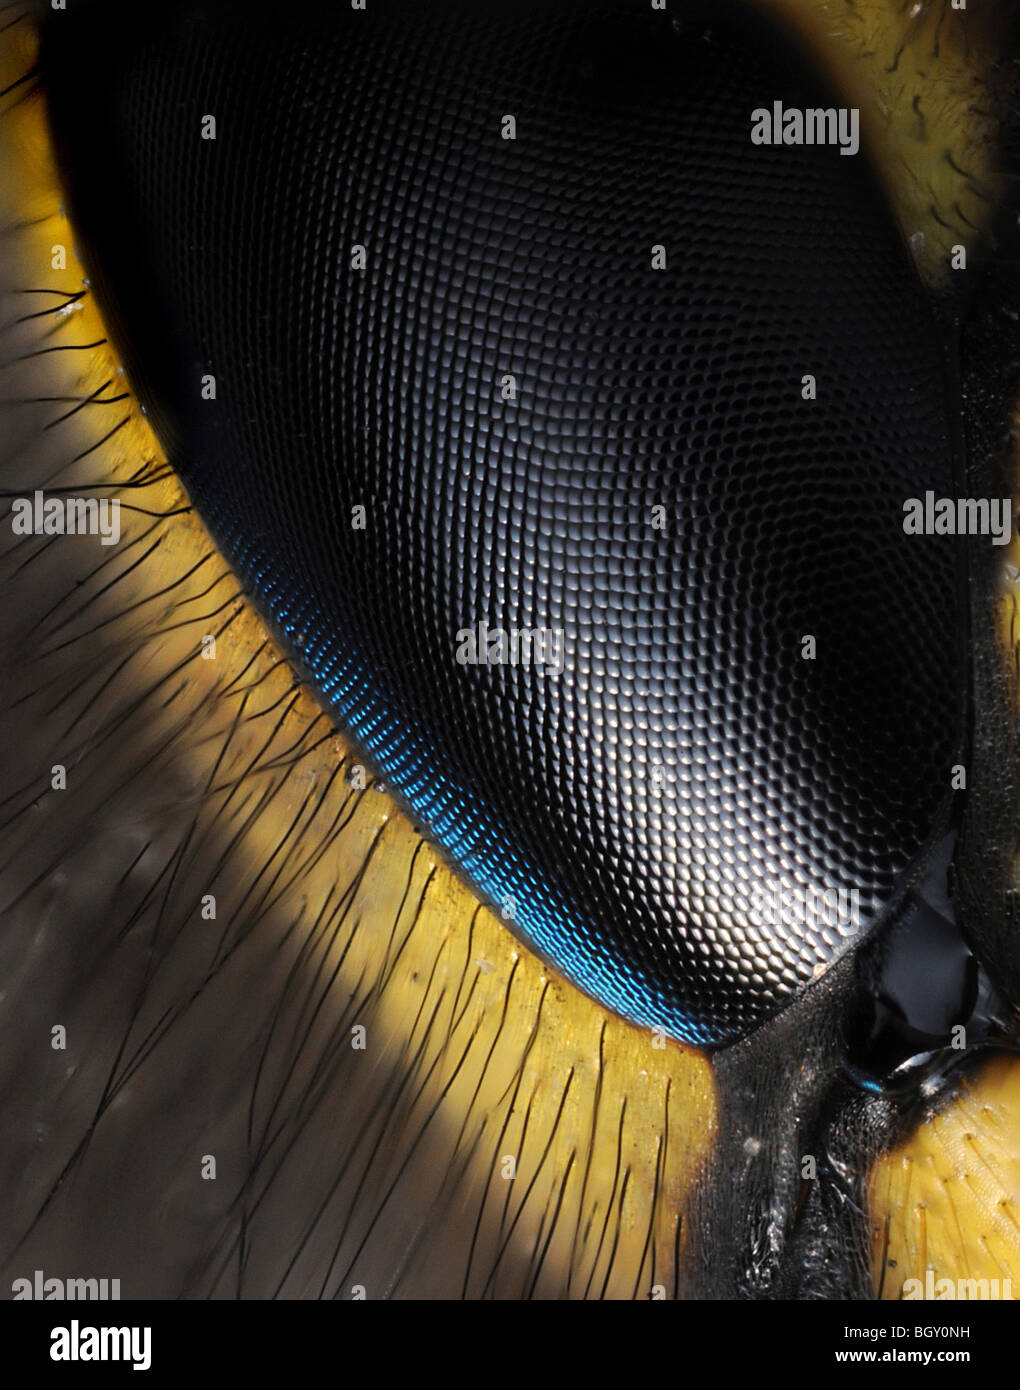 extreme close up image of a wasp's eye Stock Photo